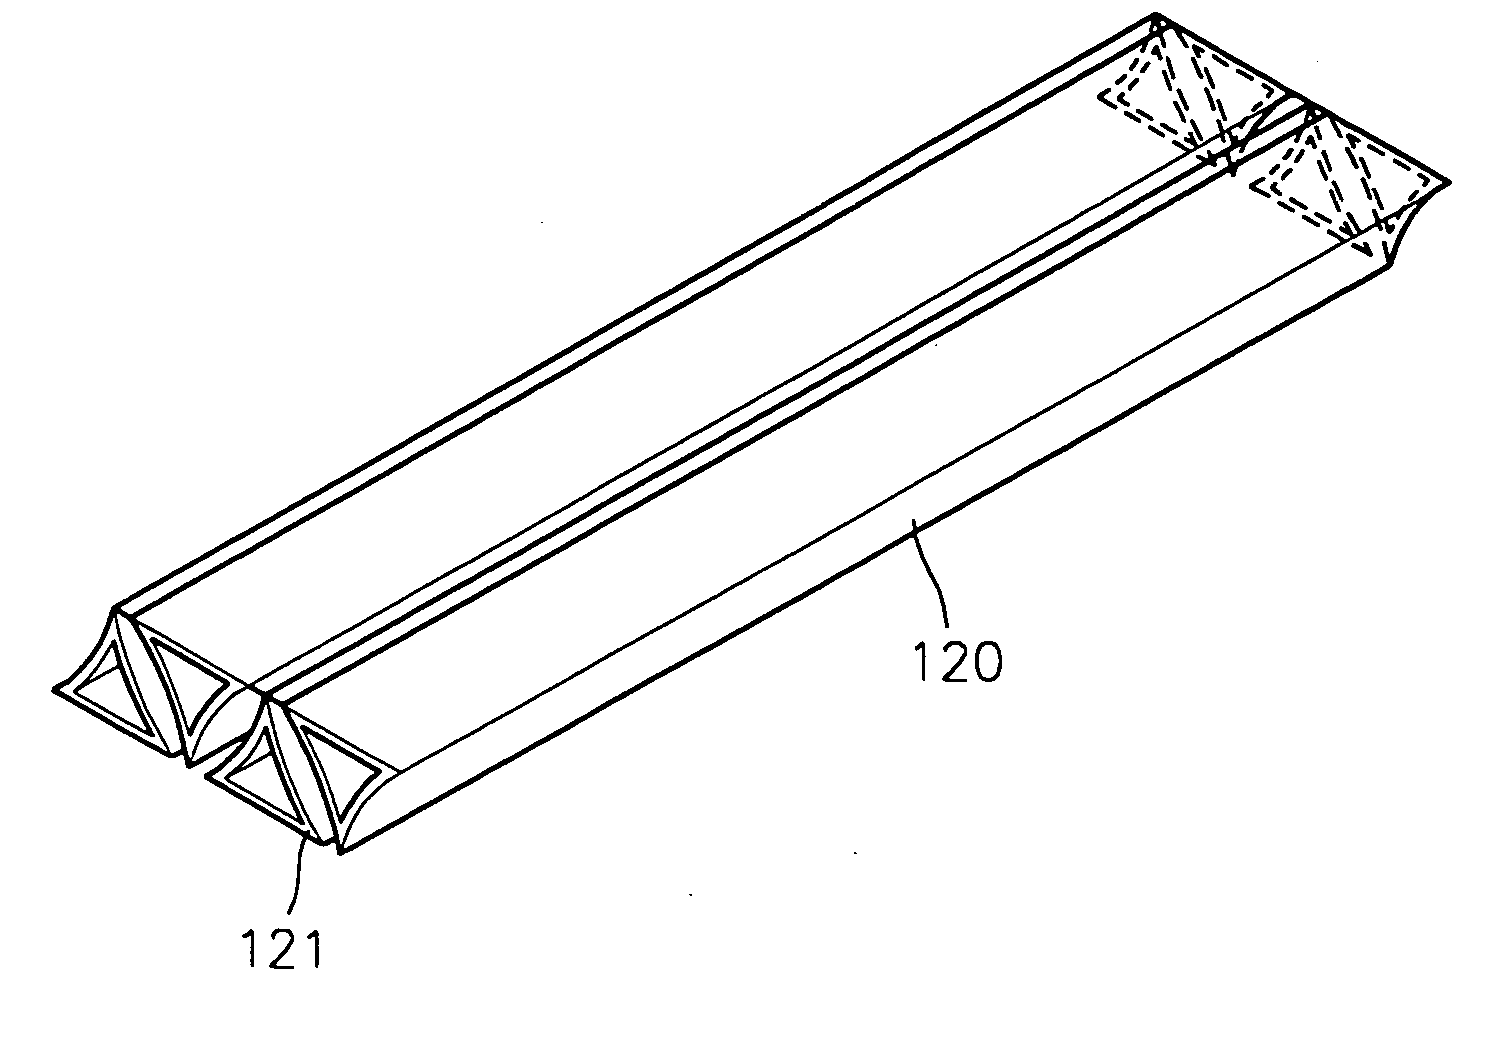 Micro heat pipe with poligonal cross-section manufactured via extrusion or drawing